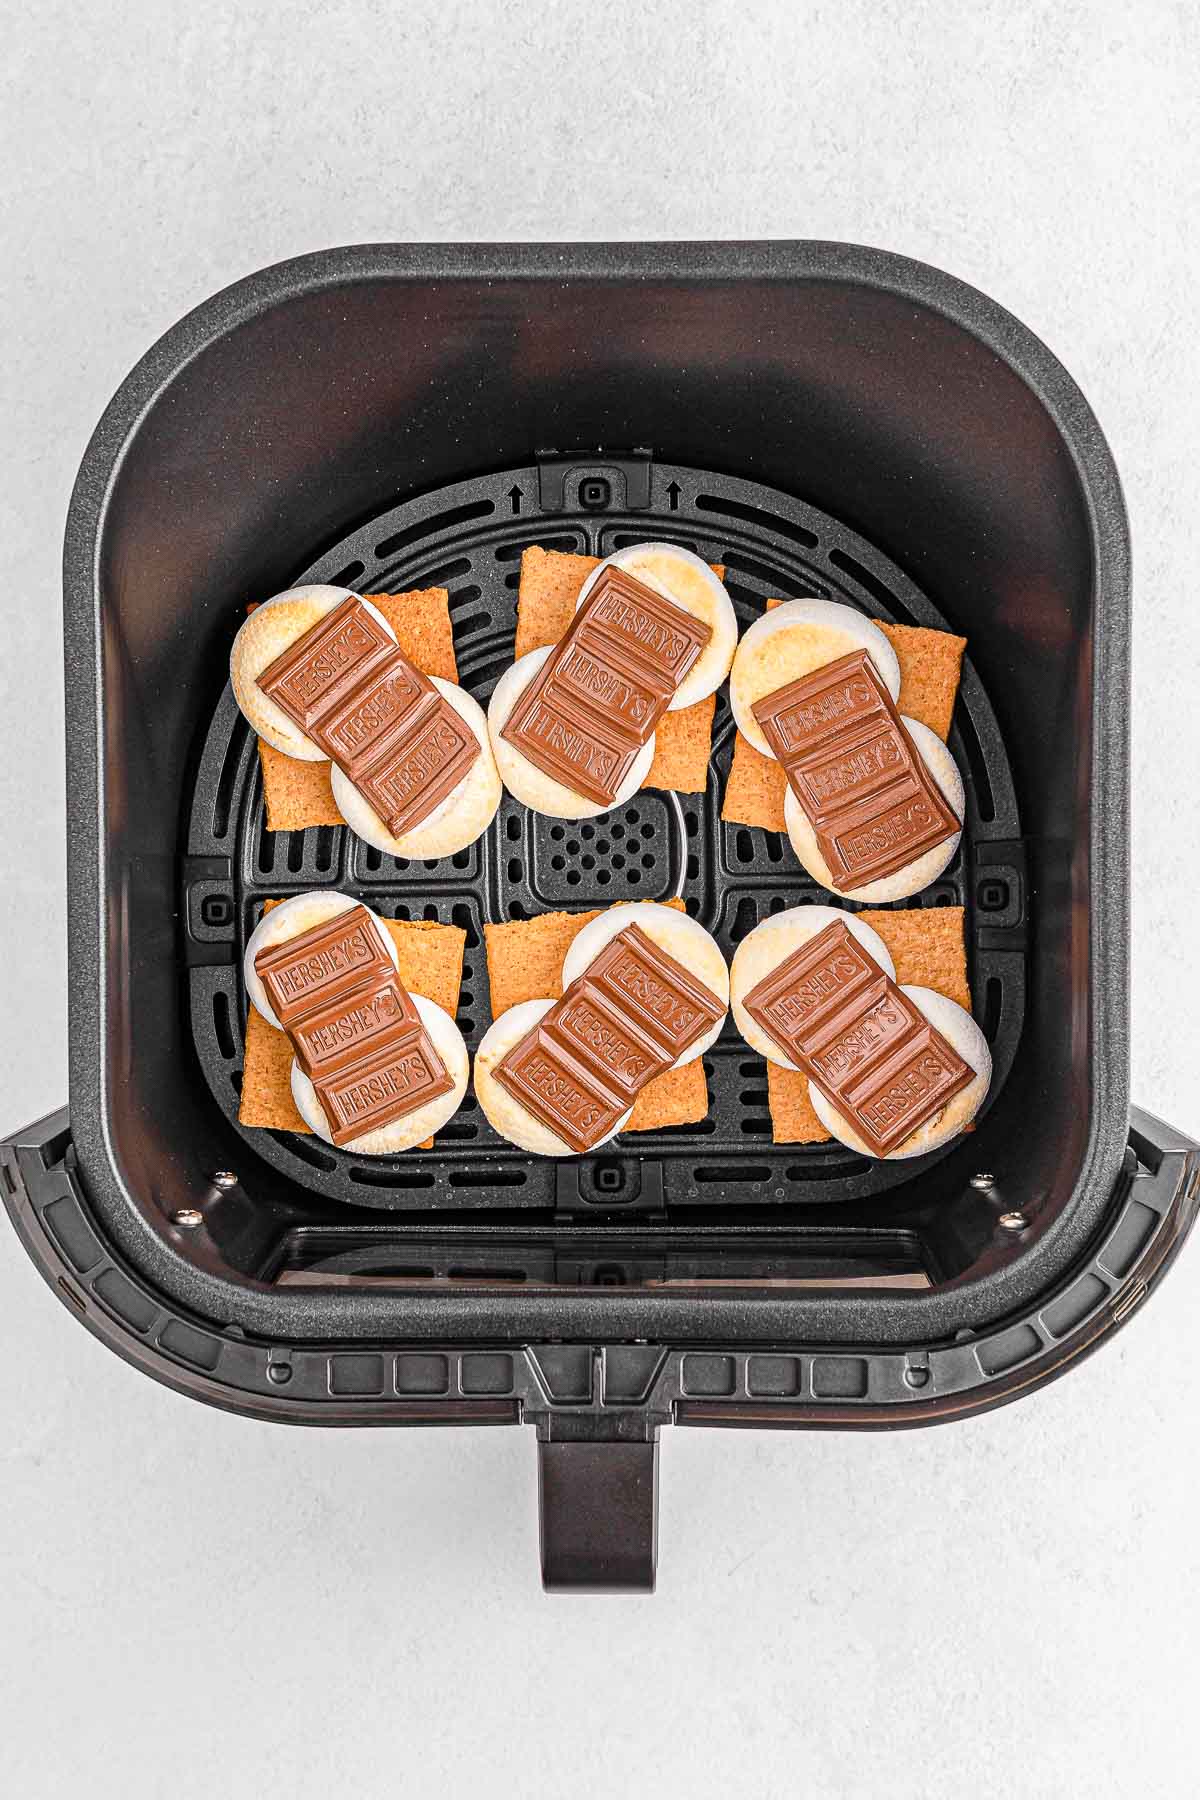 Six cooked smores in air fryer with melted chocolate.